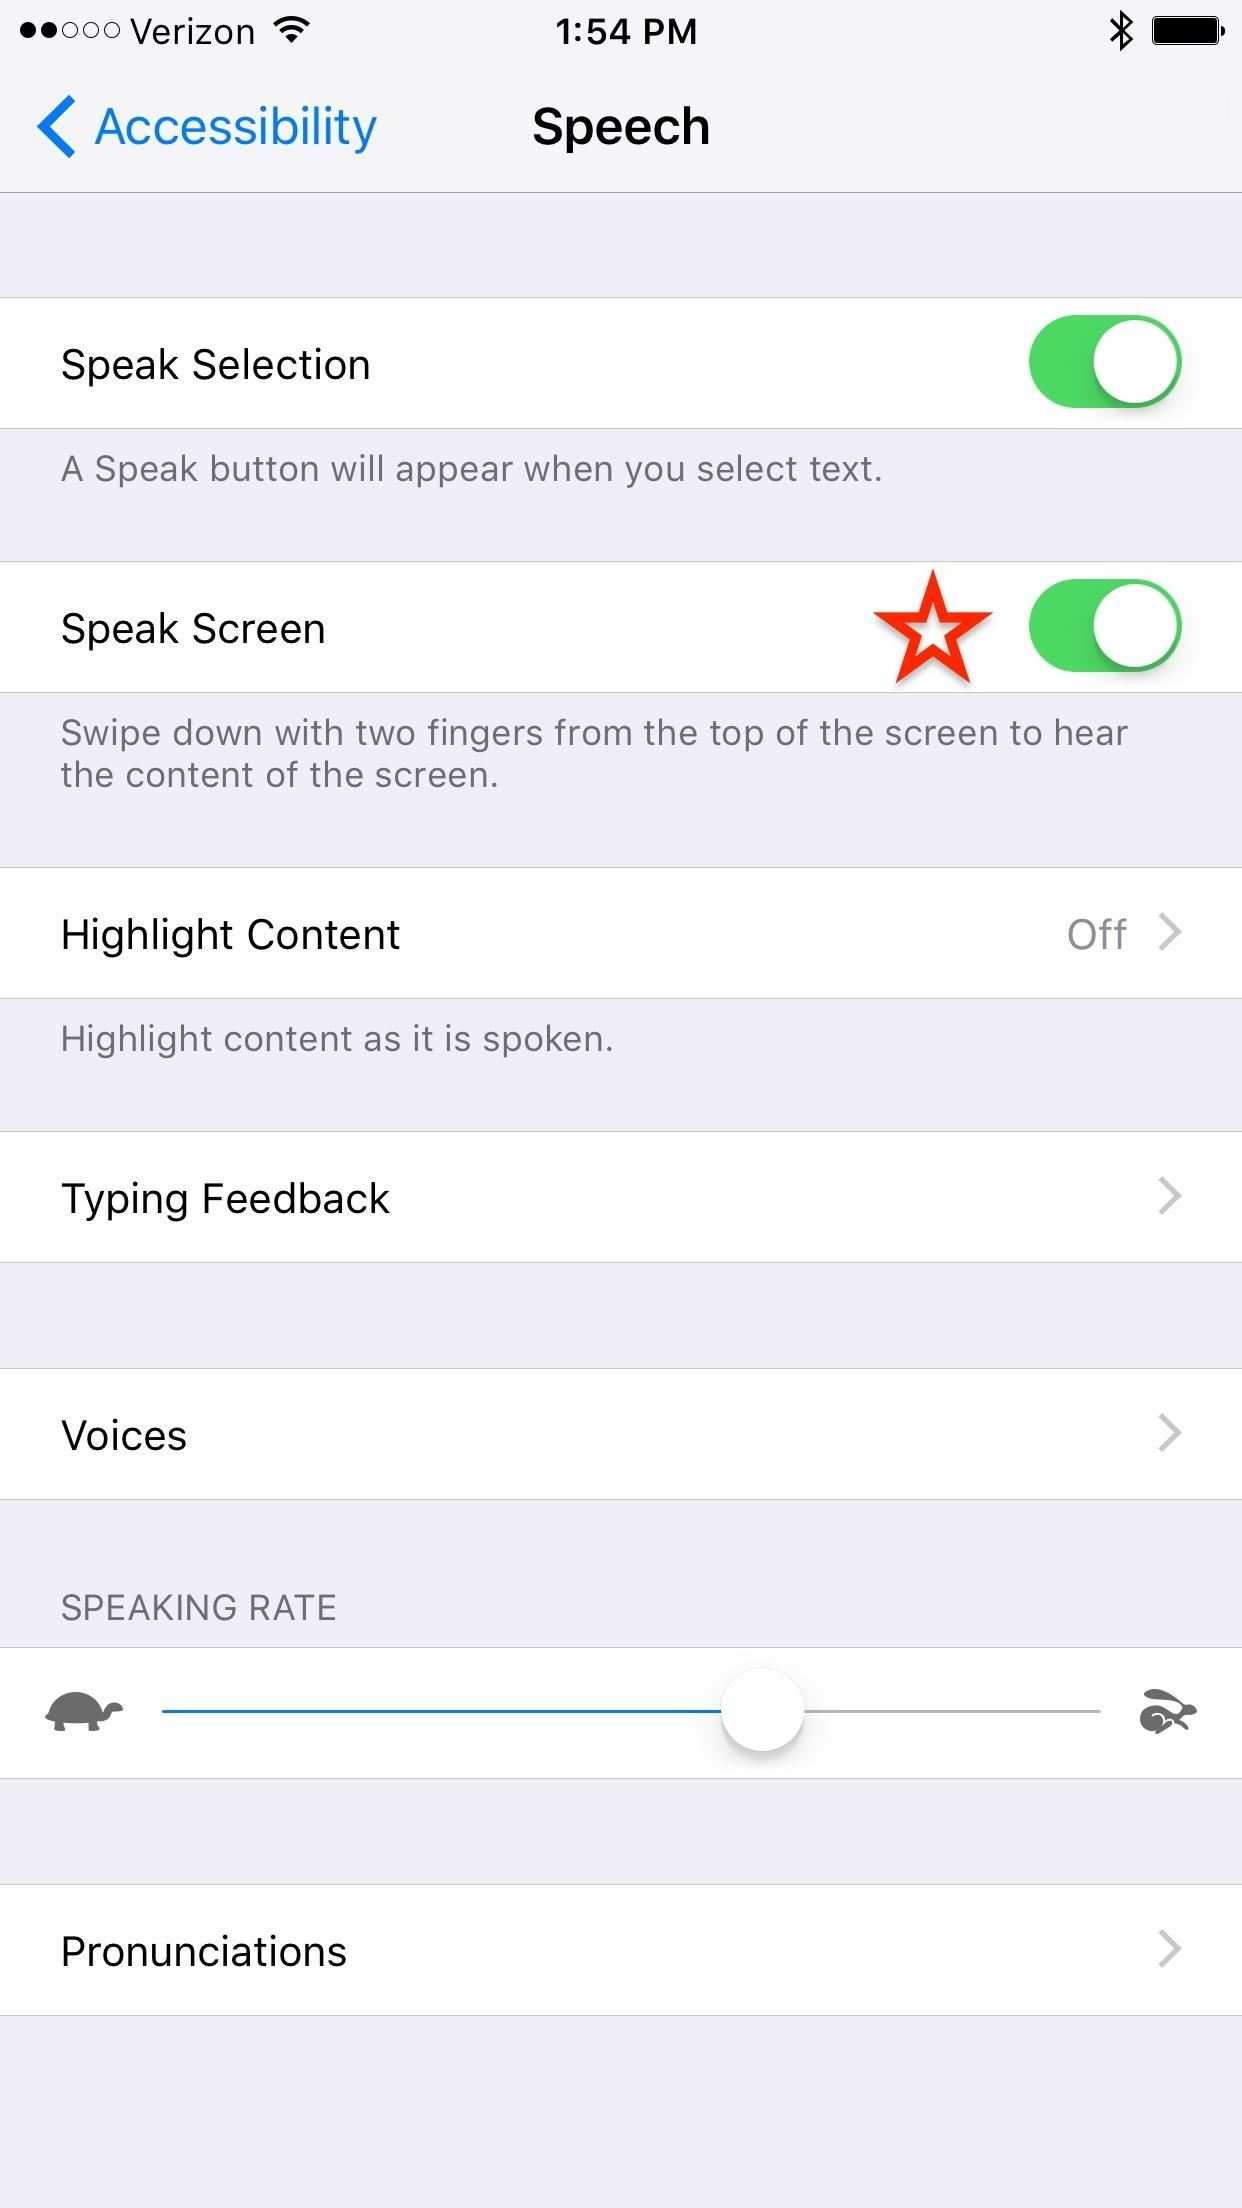 This Hidden Feature Makes Your iPhone Read Books & Articles Aloud 